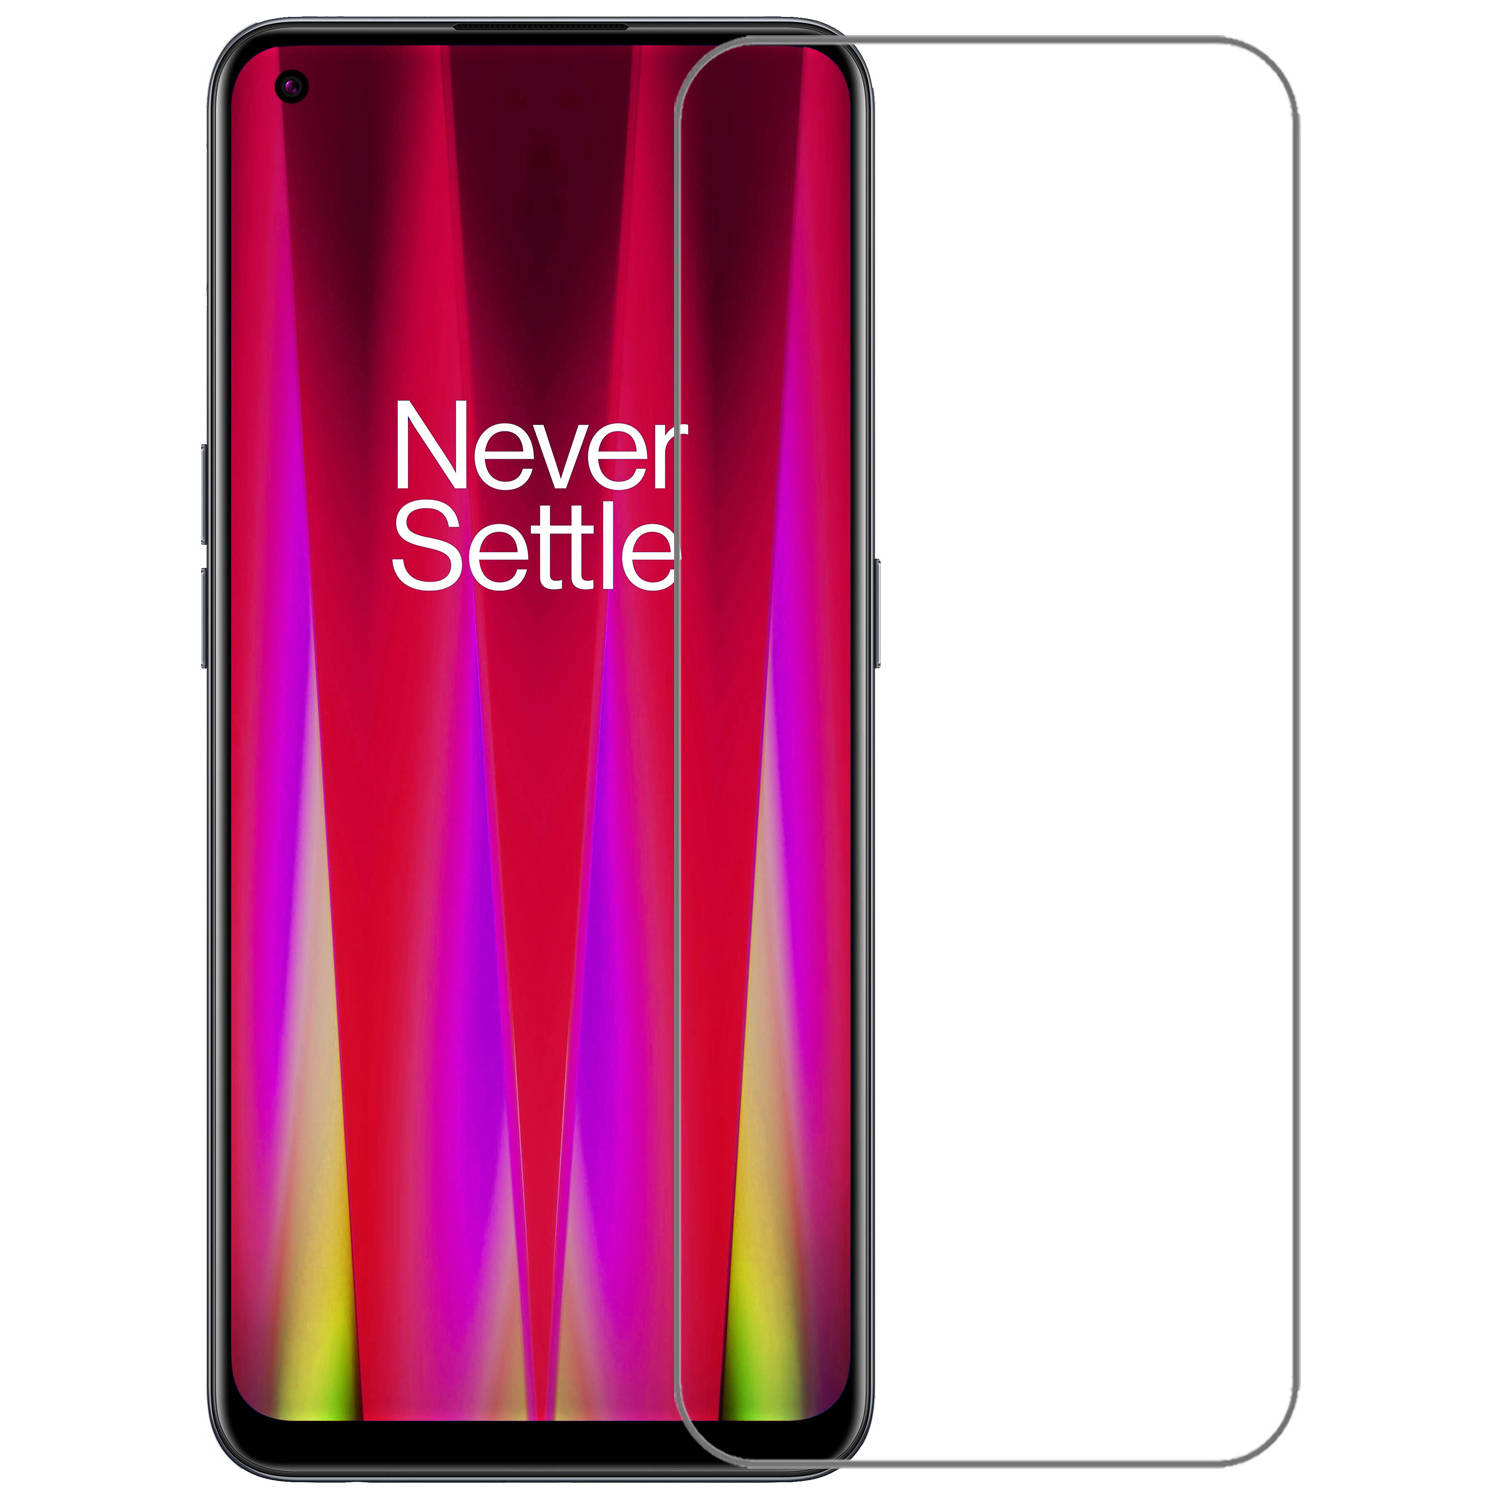 Basey Oneplus Nord Ce 2 Lite Screenprotector Tempered Glass Oneplus Nord Ce 2 Lite Beschermglas Scre